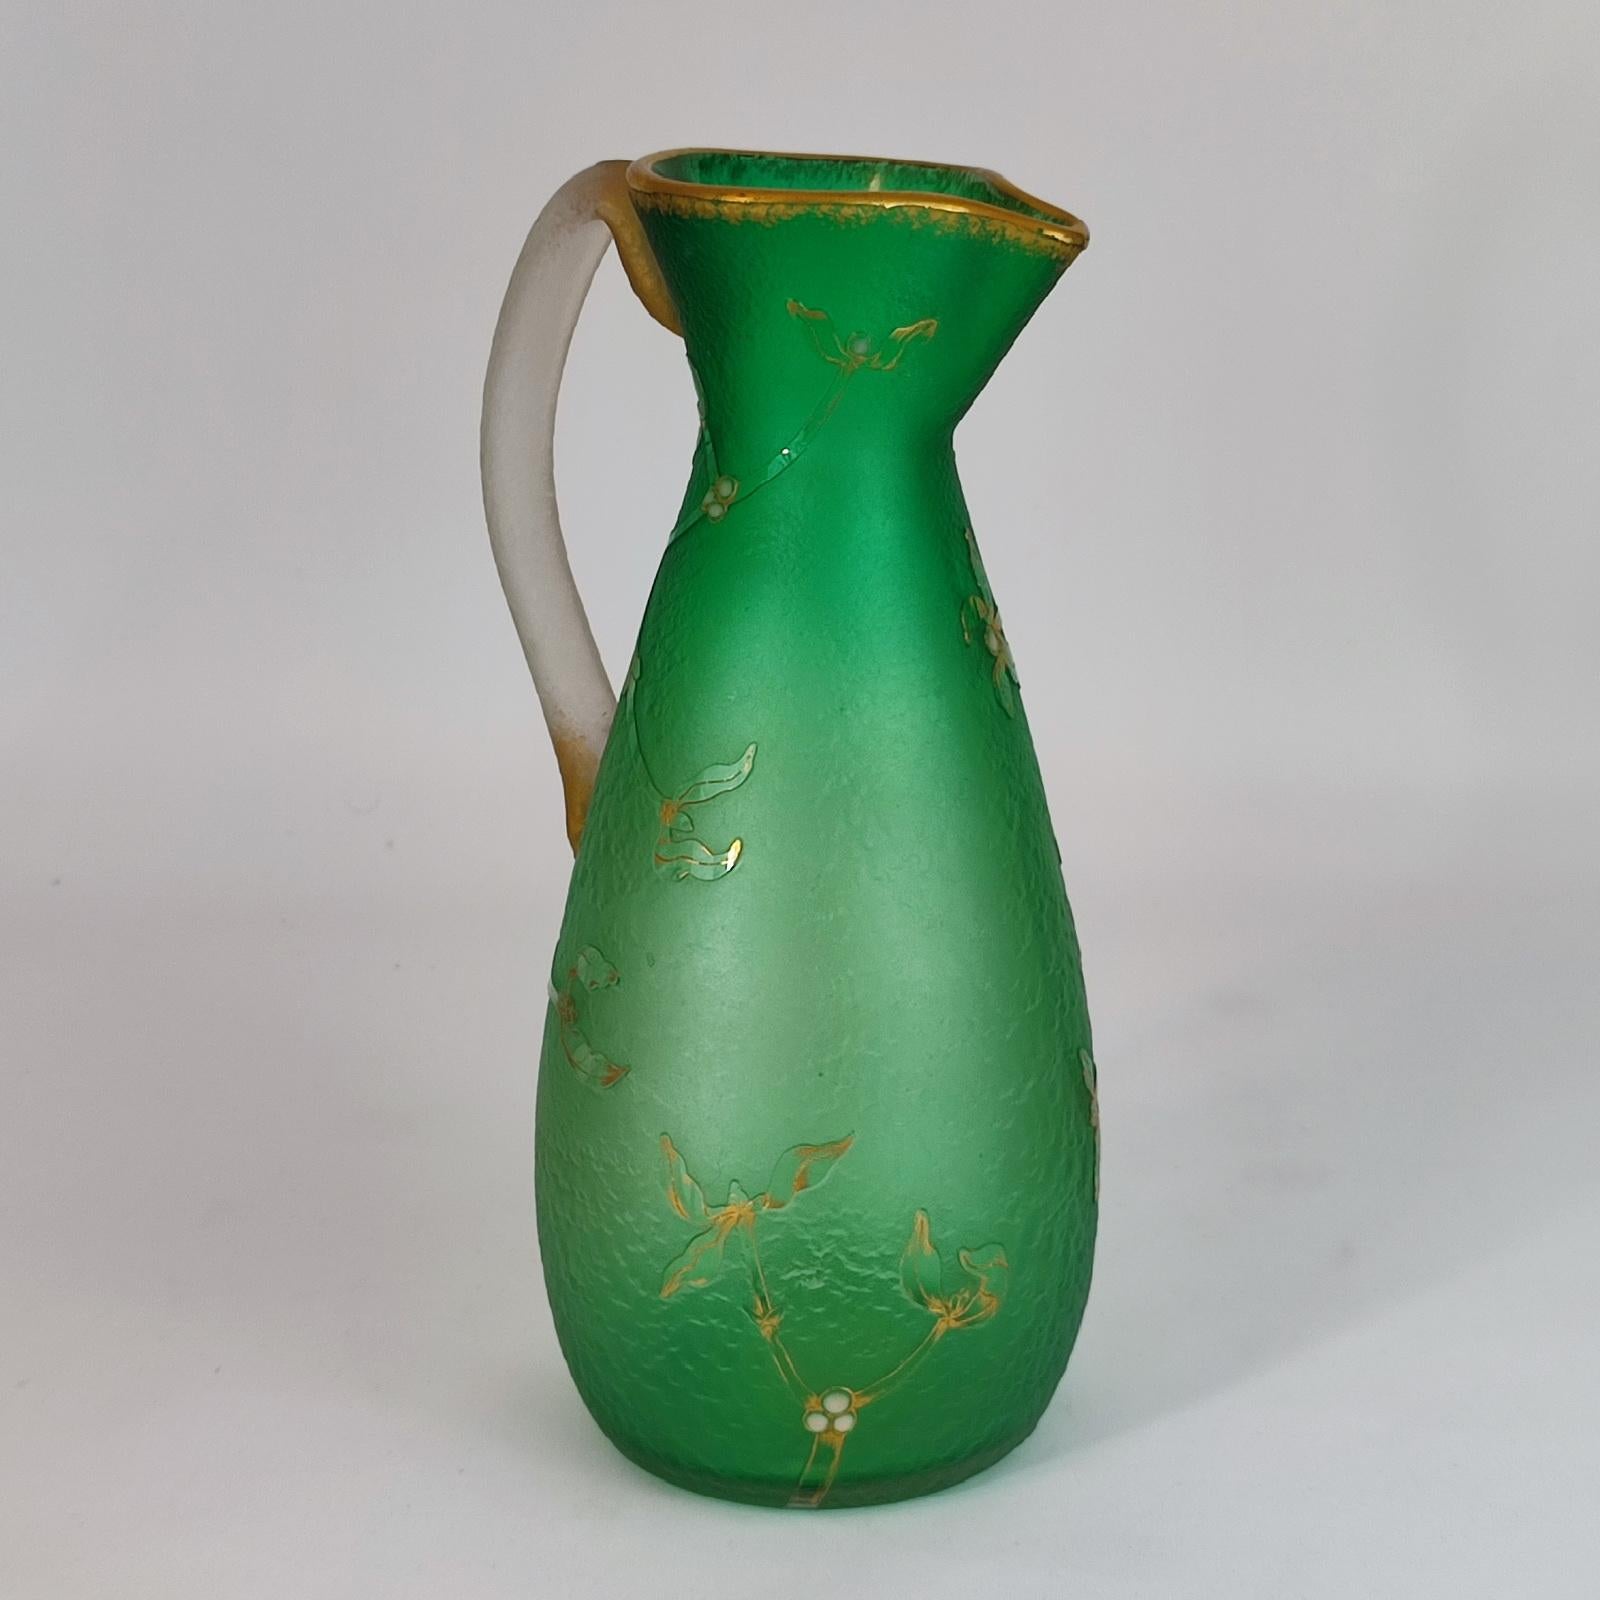 Daum Freres, Nancy, France, late 19th century large pitcher. An exquisite Art Nouveau glass vase/pitcher by Daum Nancy, roughened acid etched surface with gilt and white enameled mistletoe overlay, the base signed in gilt lettering 